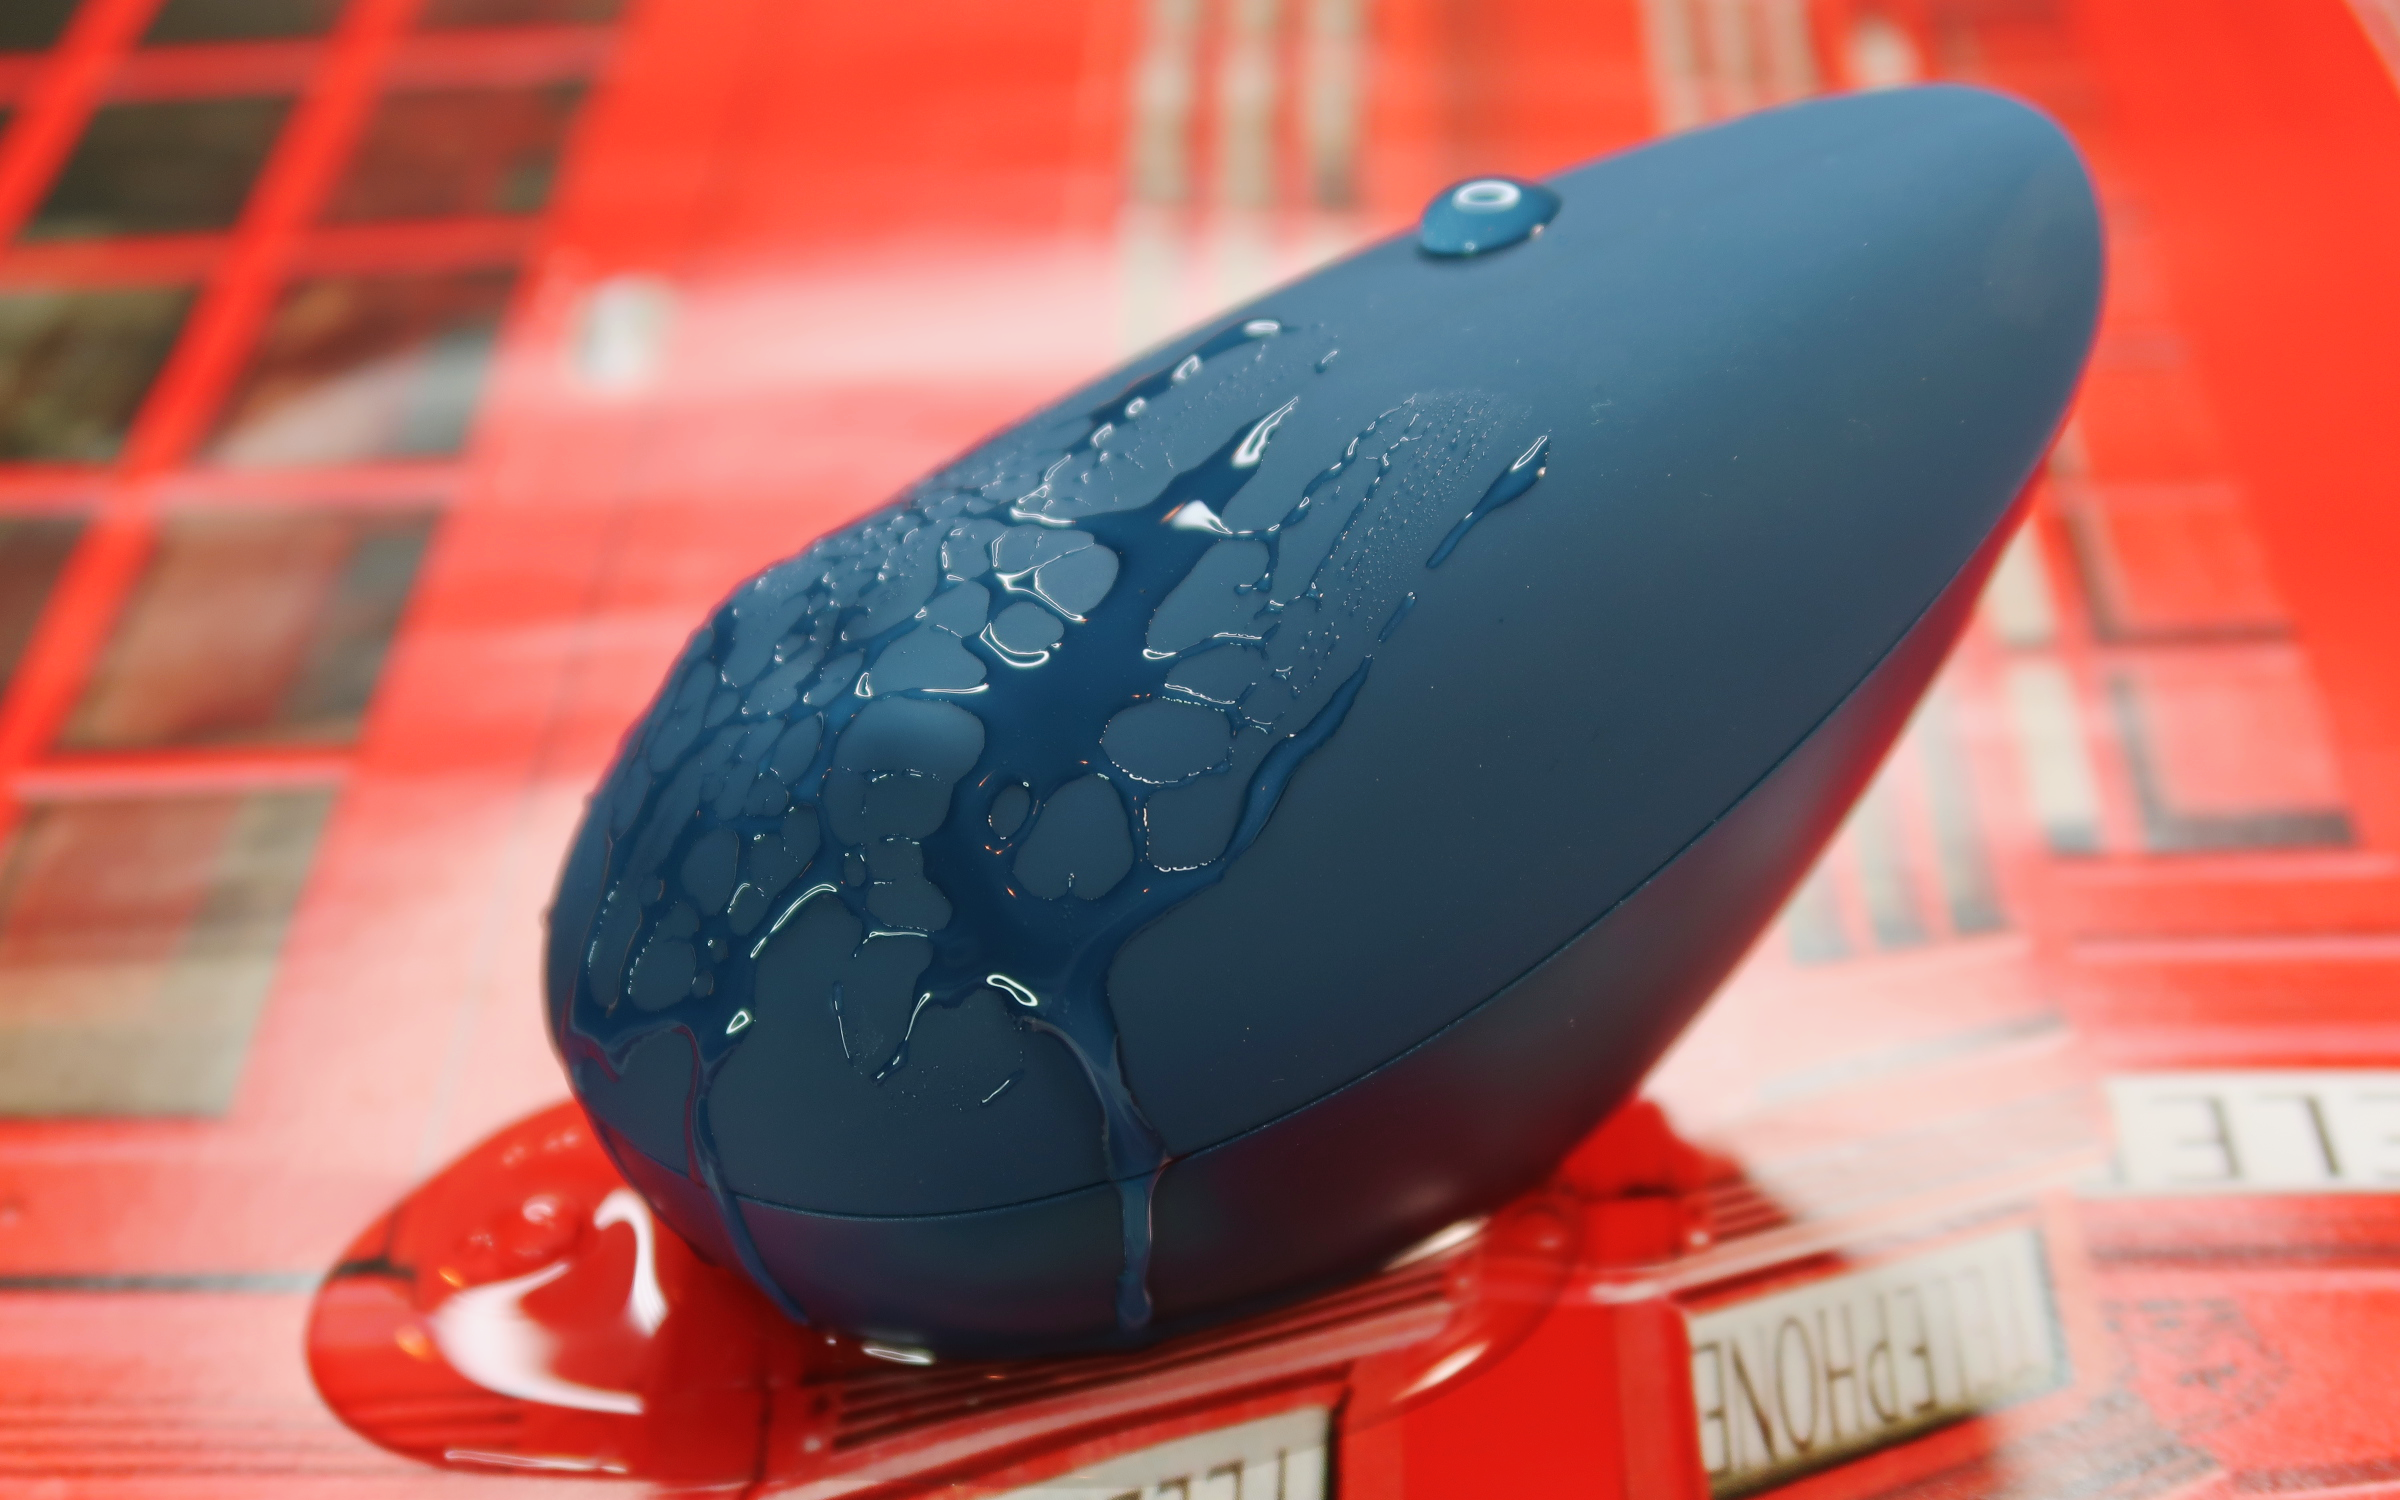 A close-up of the Filare covered in lube.